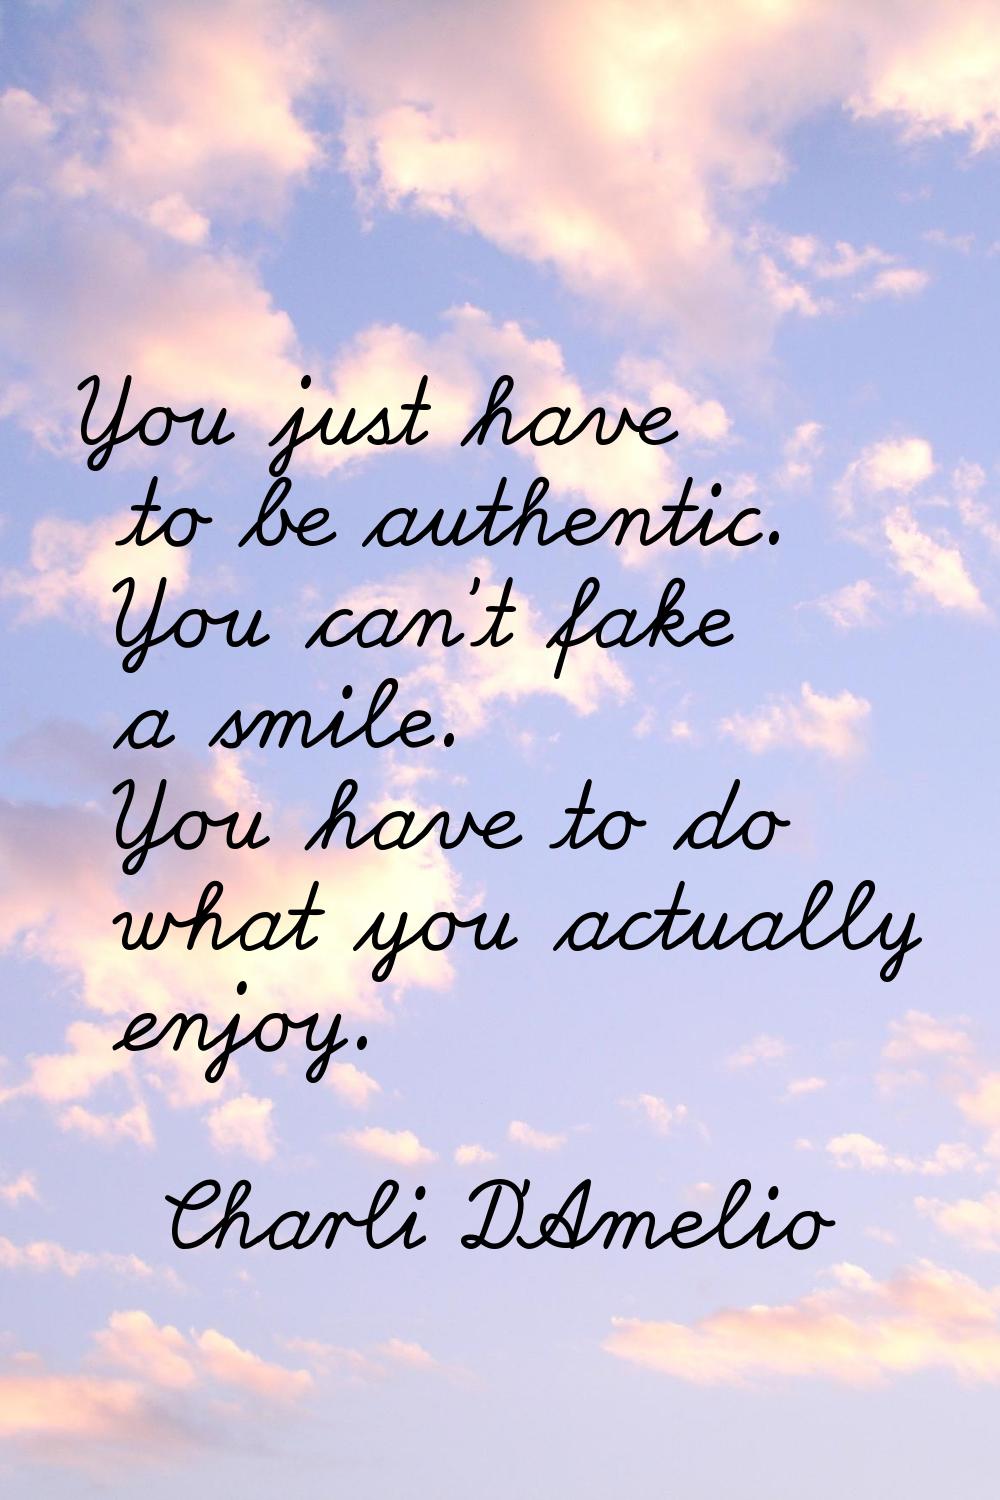 You just have to be authentic. You can't fake a smile. You have to do what you actually enjoy.